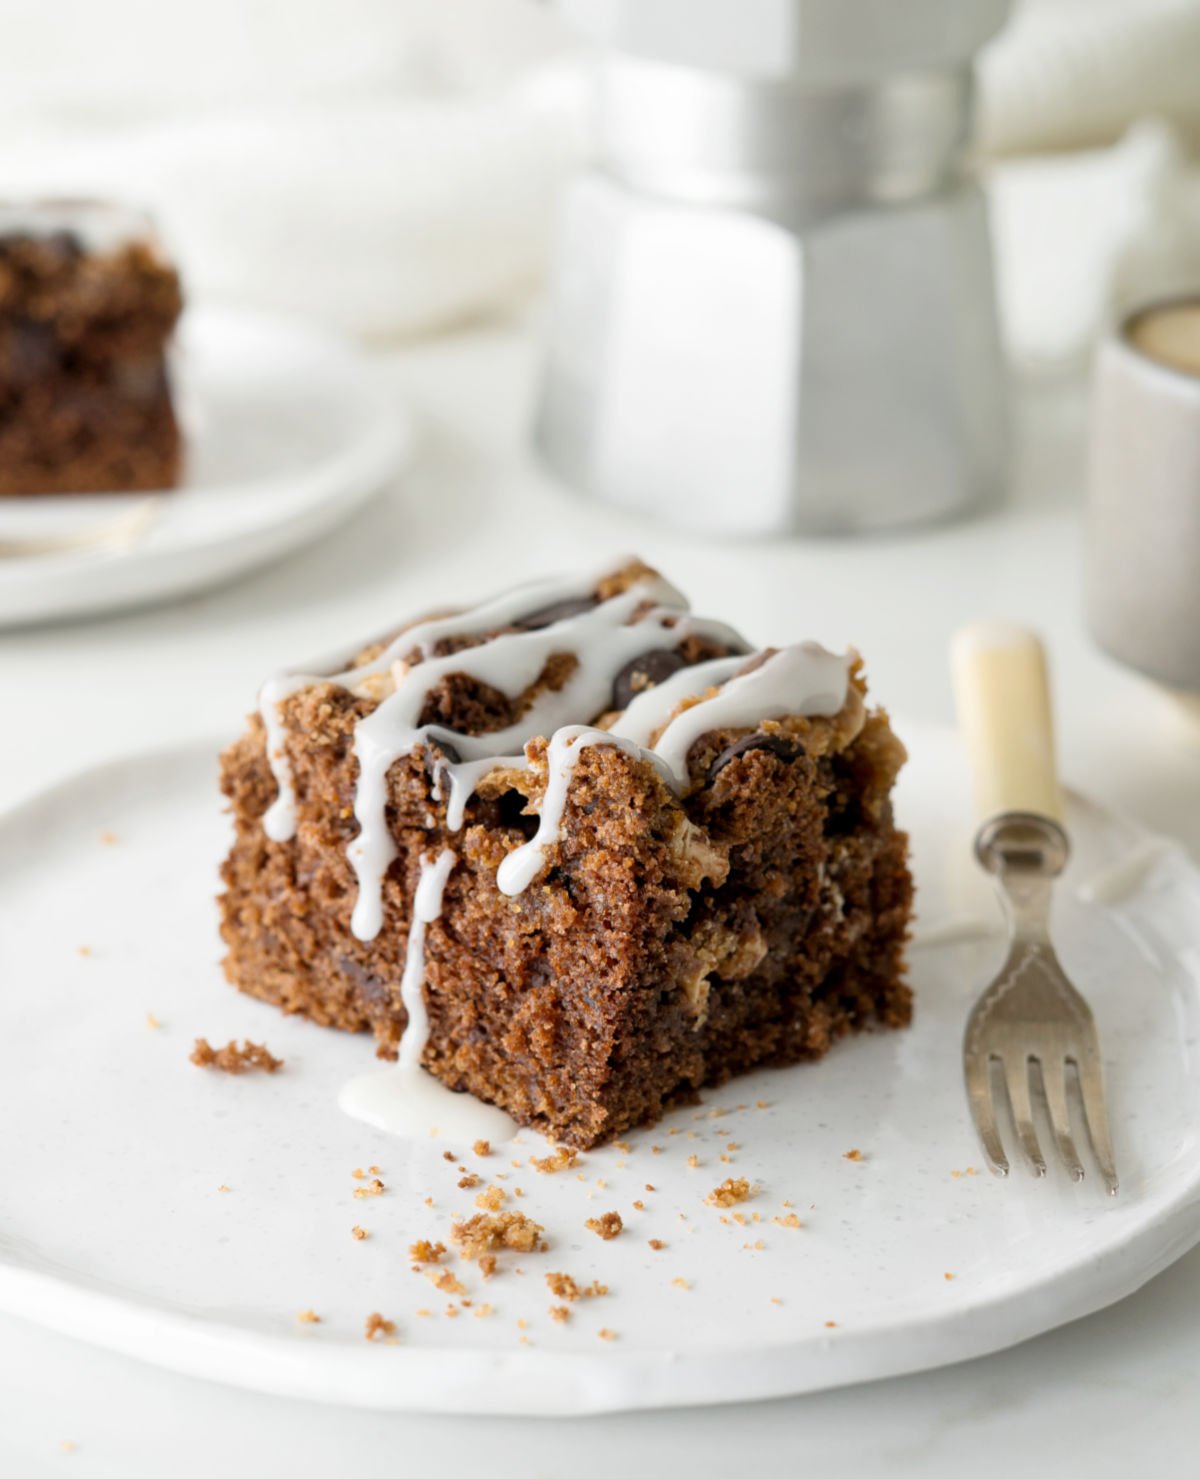 Square of glazed chocolate coffee cake on a white plate with fork. White background with coffee pot.